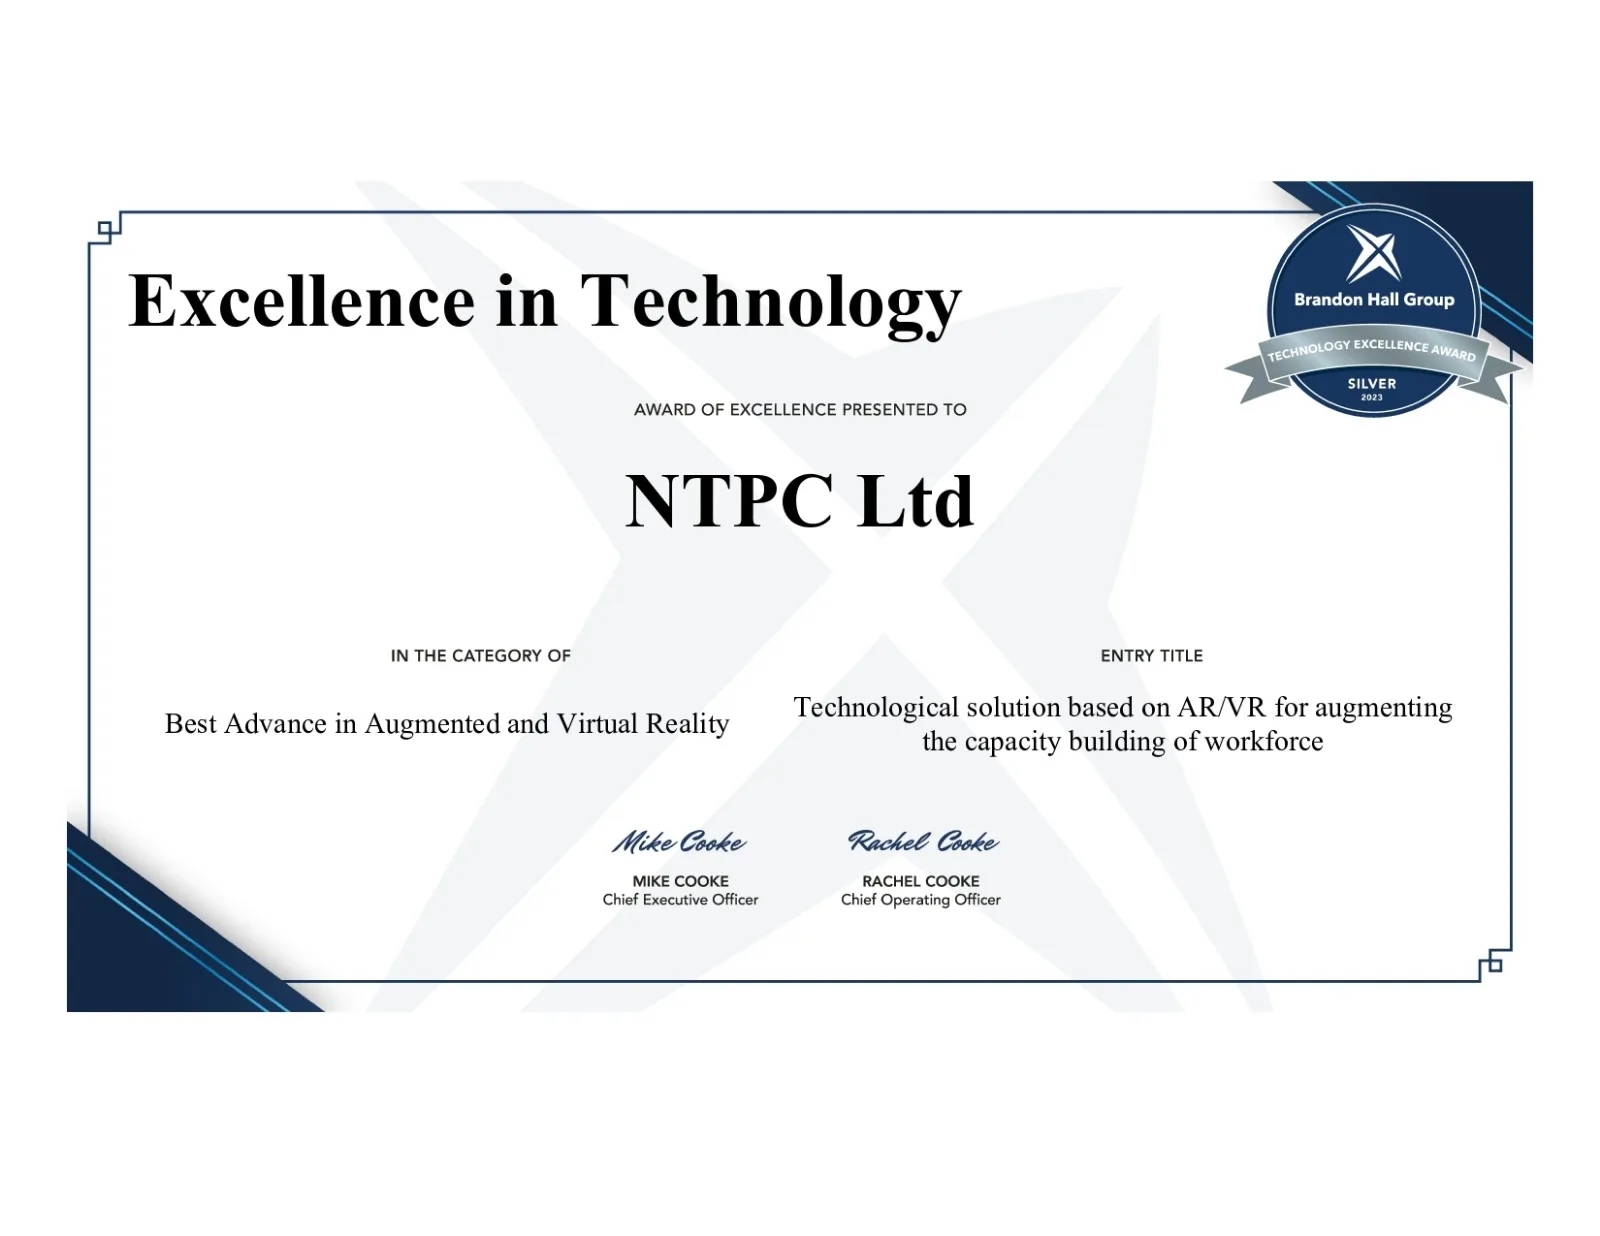 NTPC Wins Two Silver Awards in Brandon Hall Group’s Excellence in Technology Awards